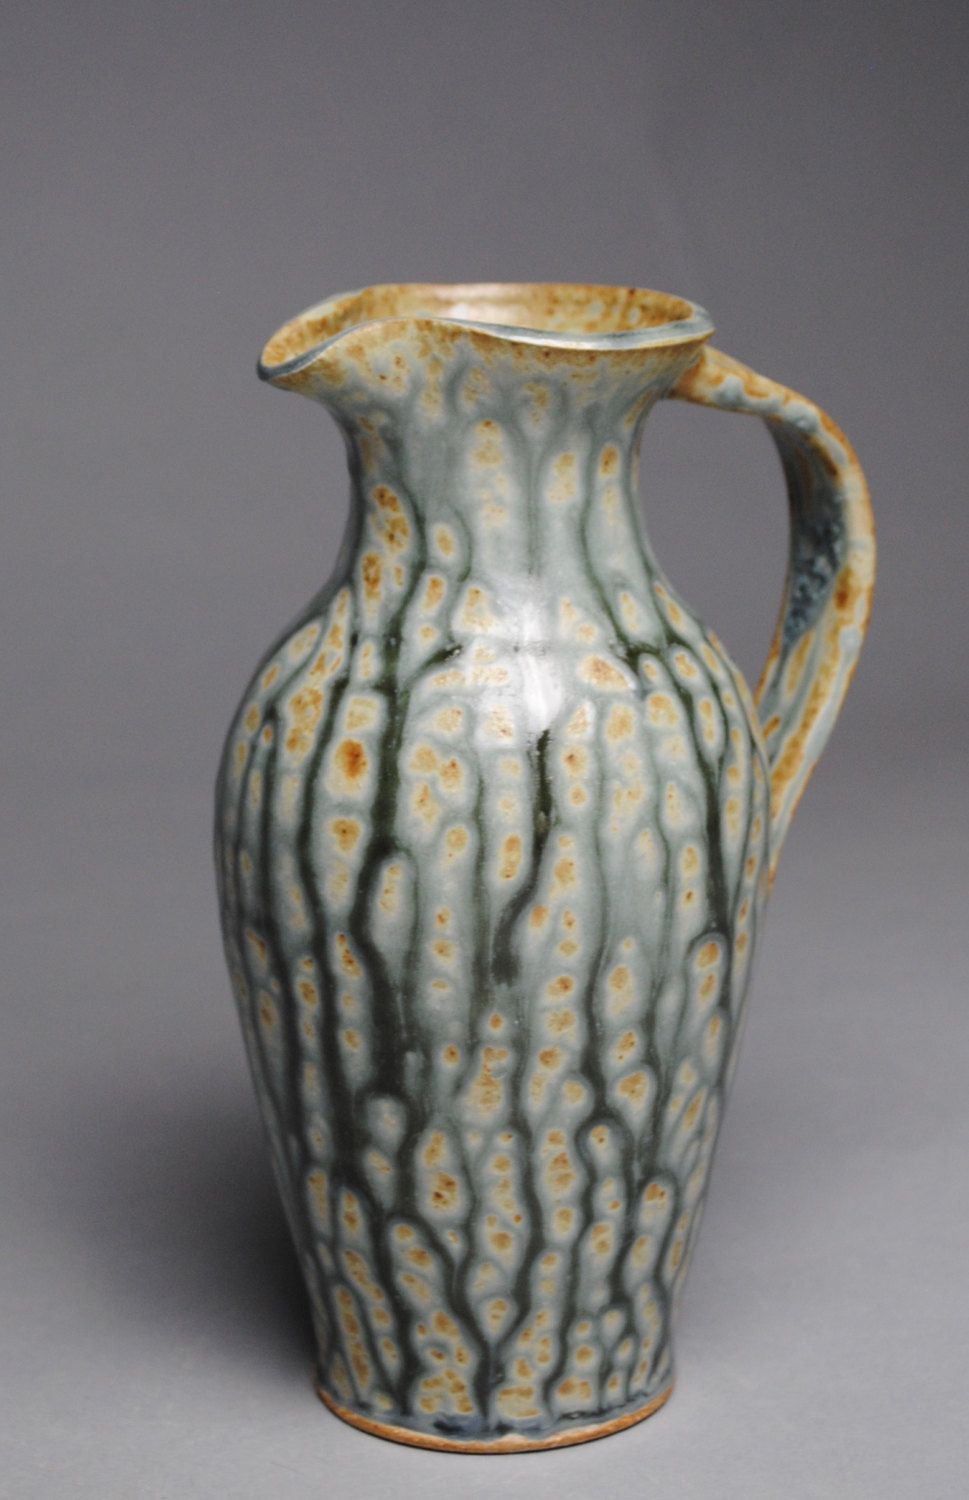 29 Recommended Pottery Vases Handmade 2024 free download pottery vases handmade of clay pitcher blue ash e93 by johnmccoypottery on etsy handmade within clay